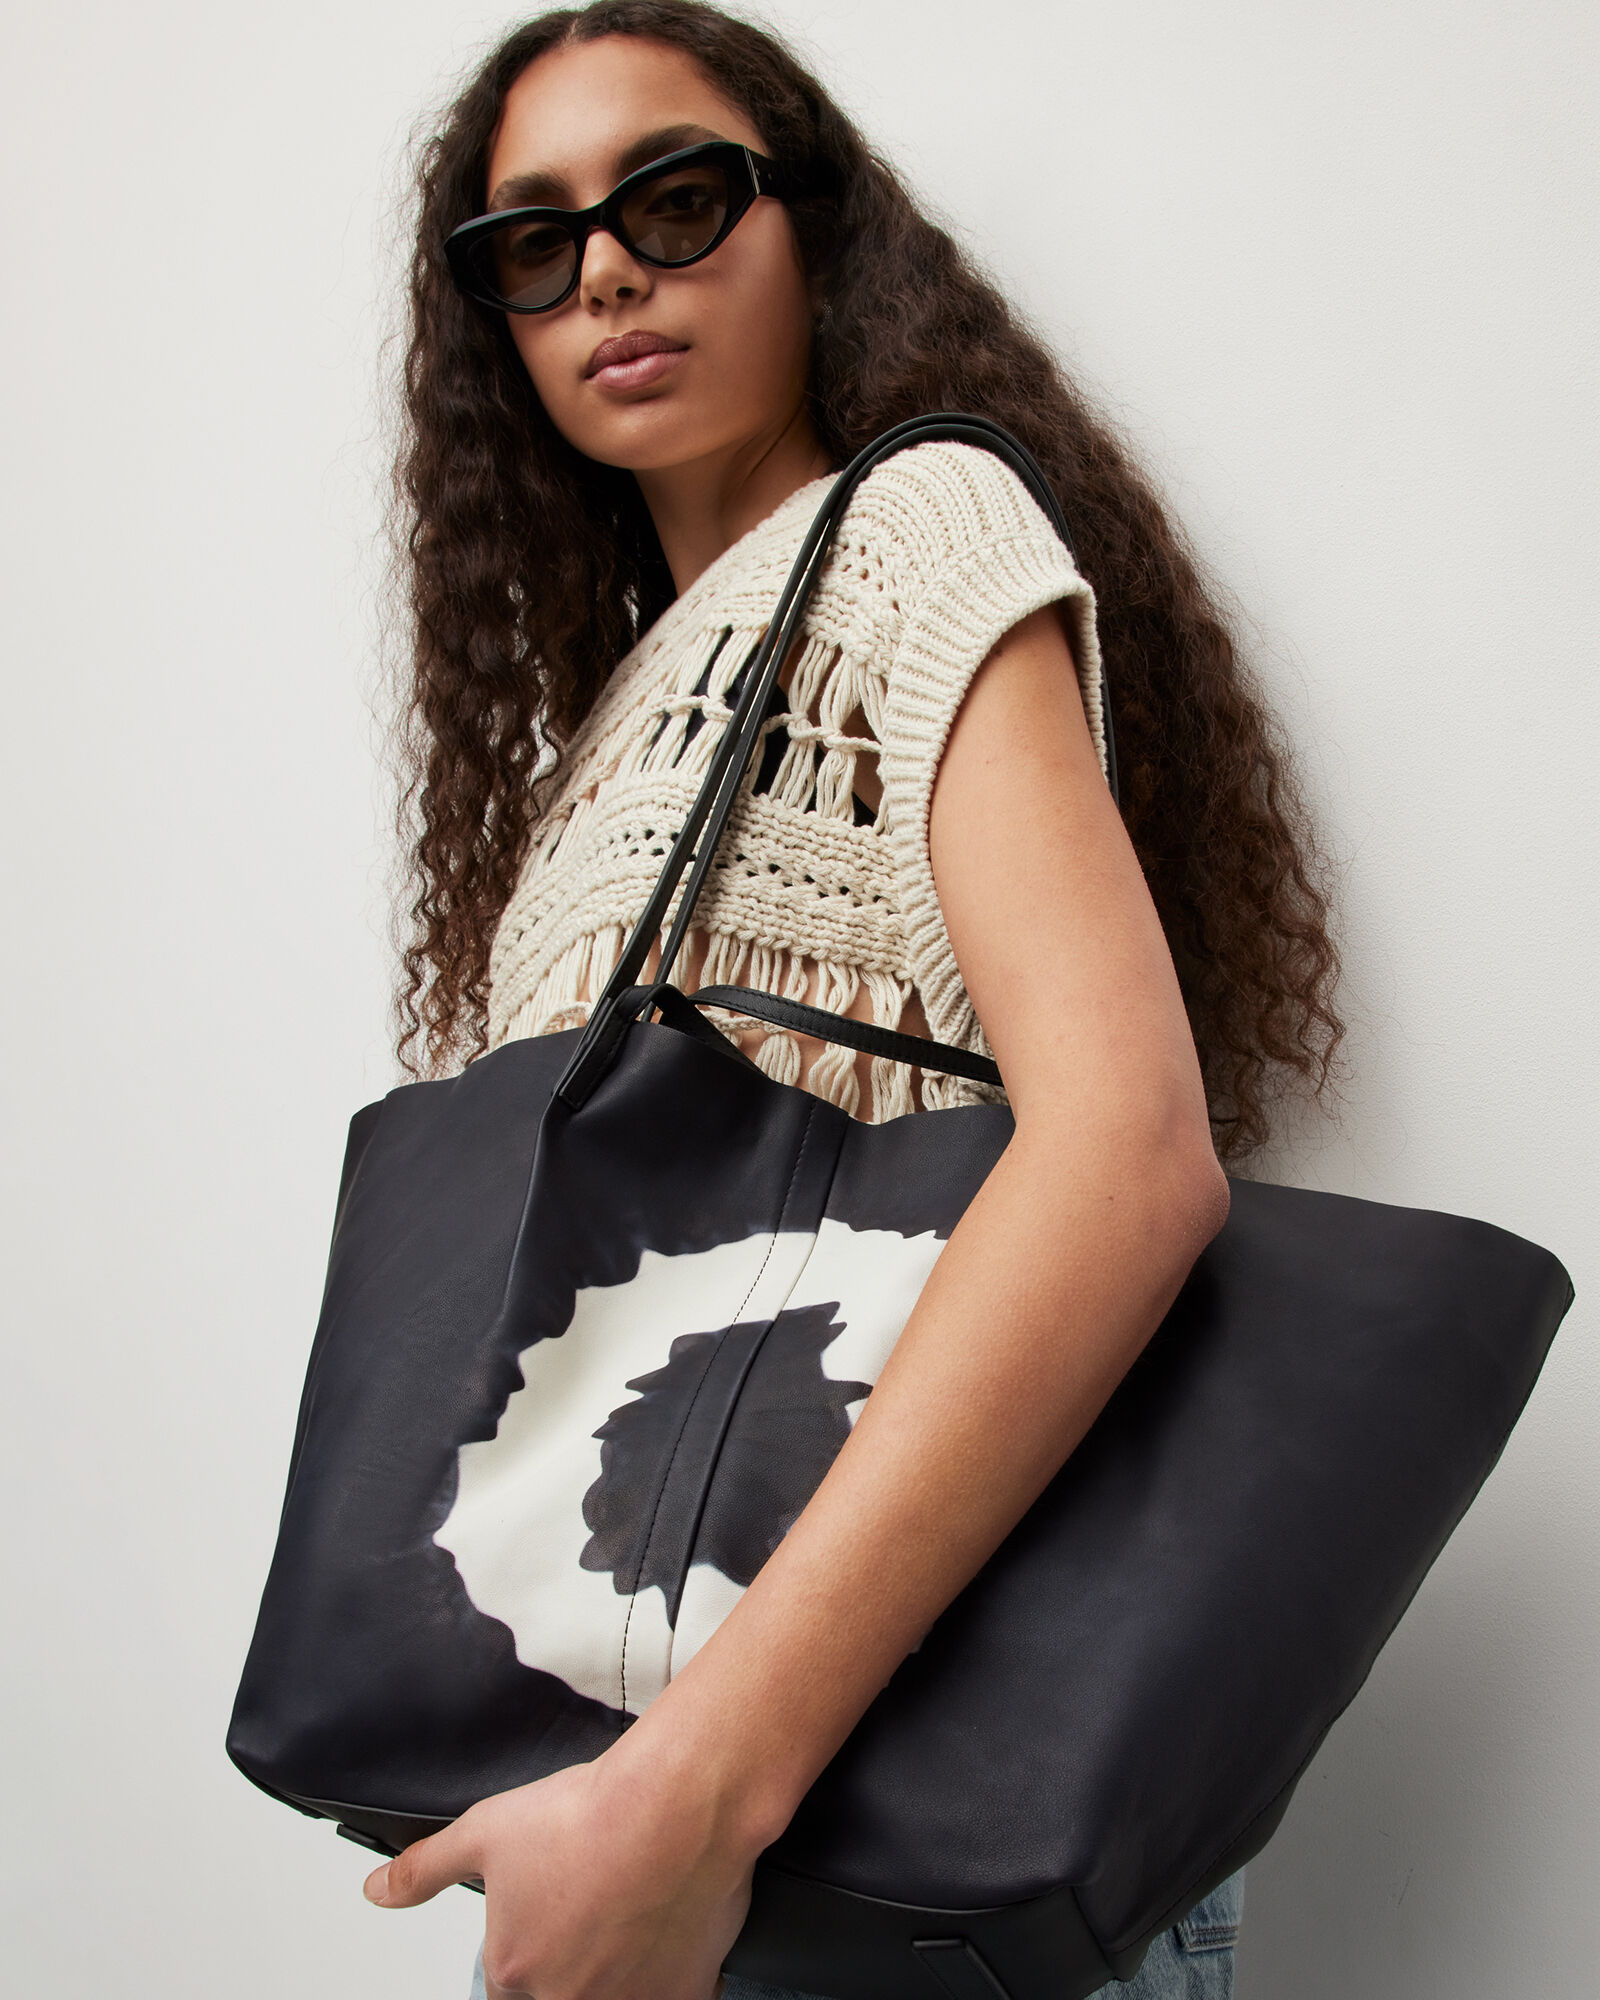 Shop Finest Tote Bags For women At Best Prices From Nykaa Fashion